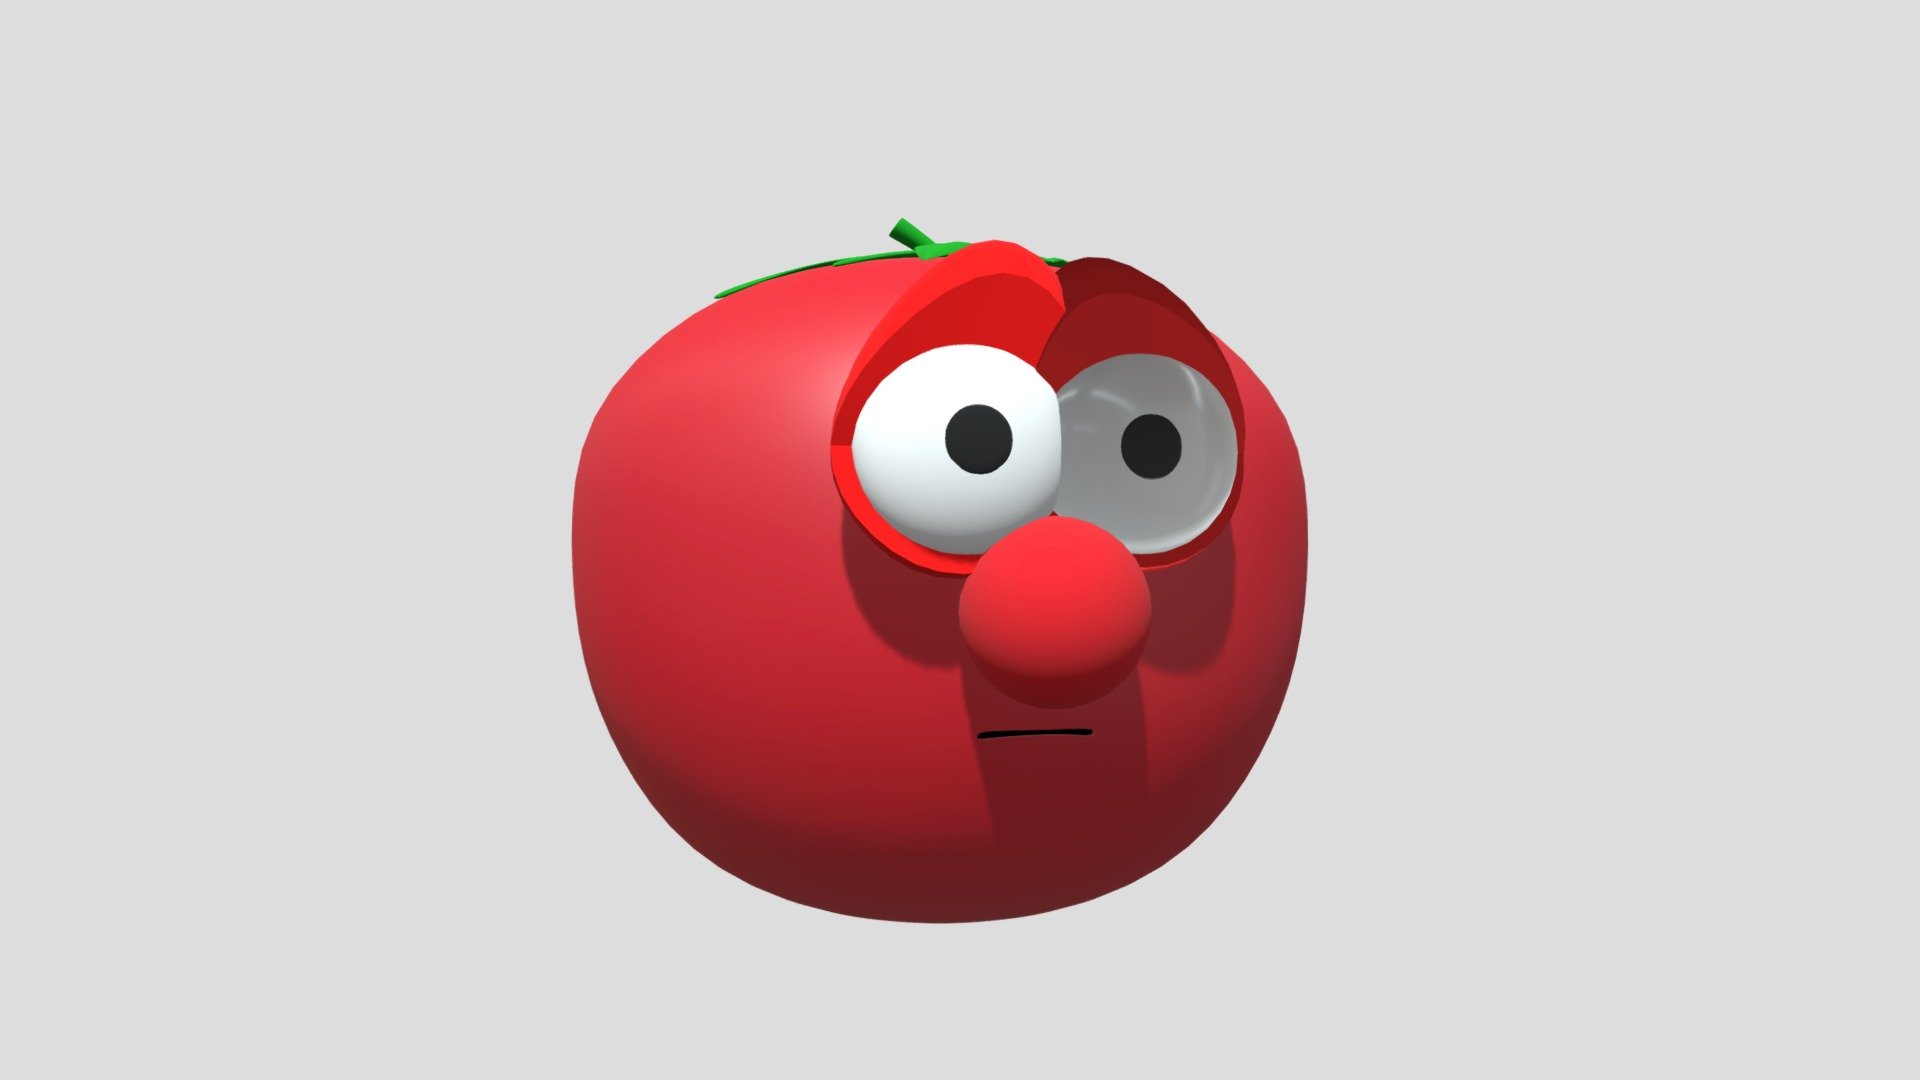 Design of Bob the Tomato (co-host of VeggieTales) seen in several VeggieTales episodes from Late 2000 to 2004.

Rig, mouth, eyes and original Bob the Tomato model by Cmanflip - Bob the Tomato (Late 2000) - Download Free 3D model by Janice Emmons 1990-present (@JaniceEmmons1990) 3d model